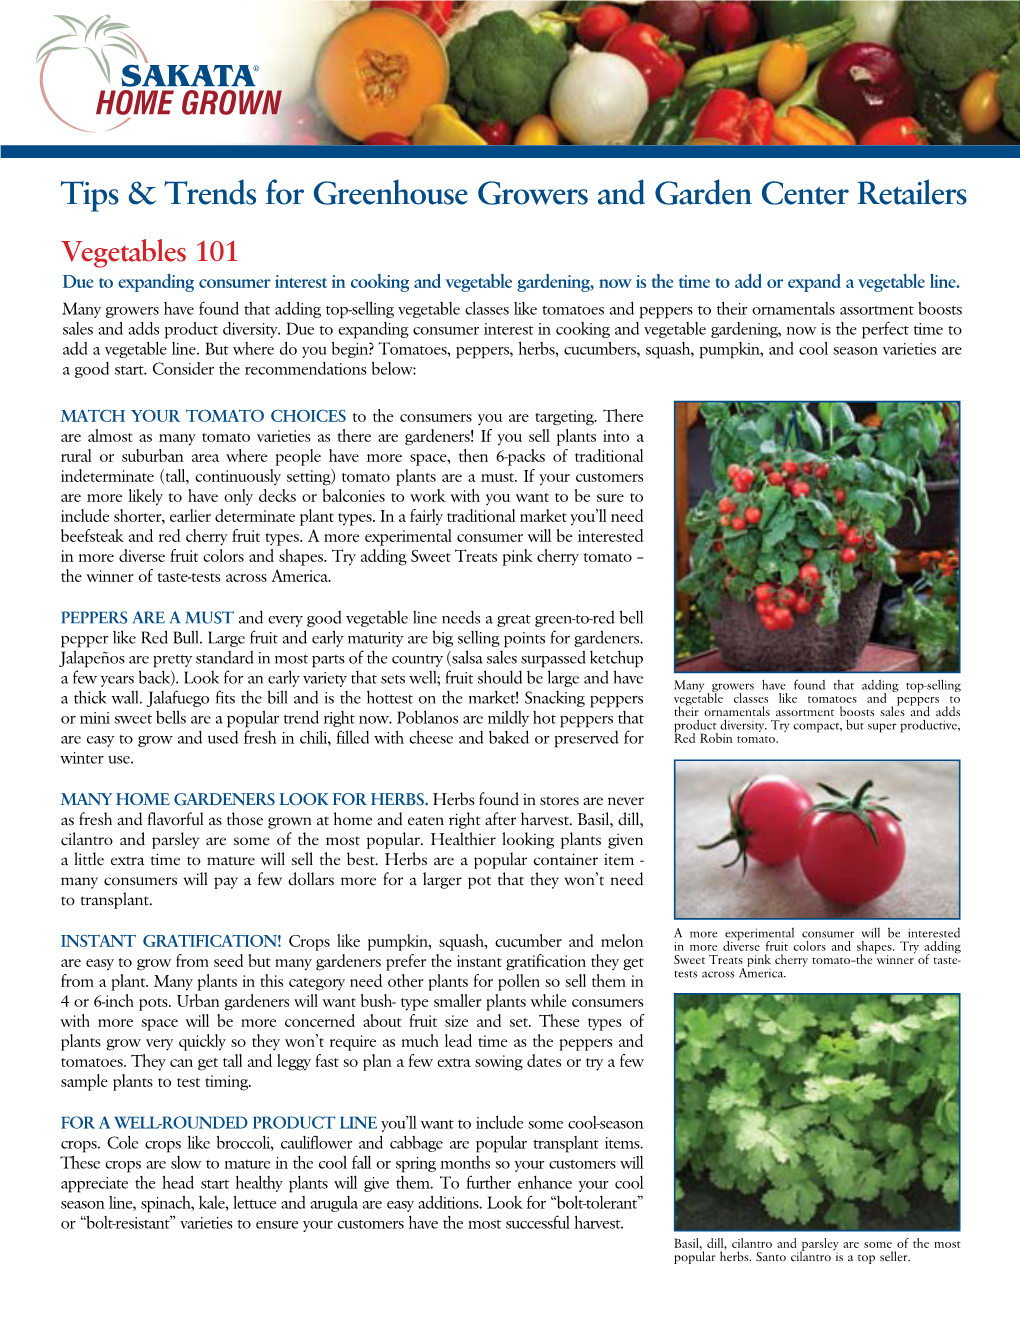 Tips for Greenhouse Growers & Garden Centers